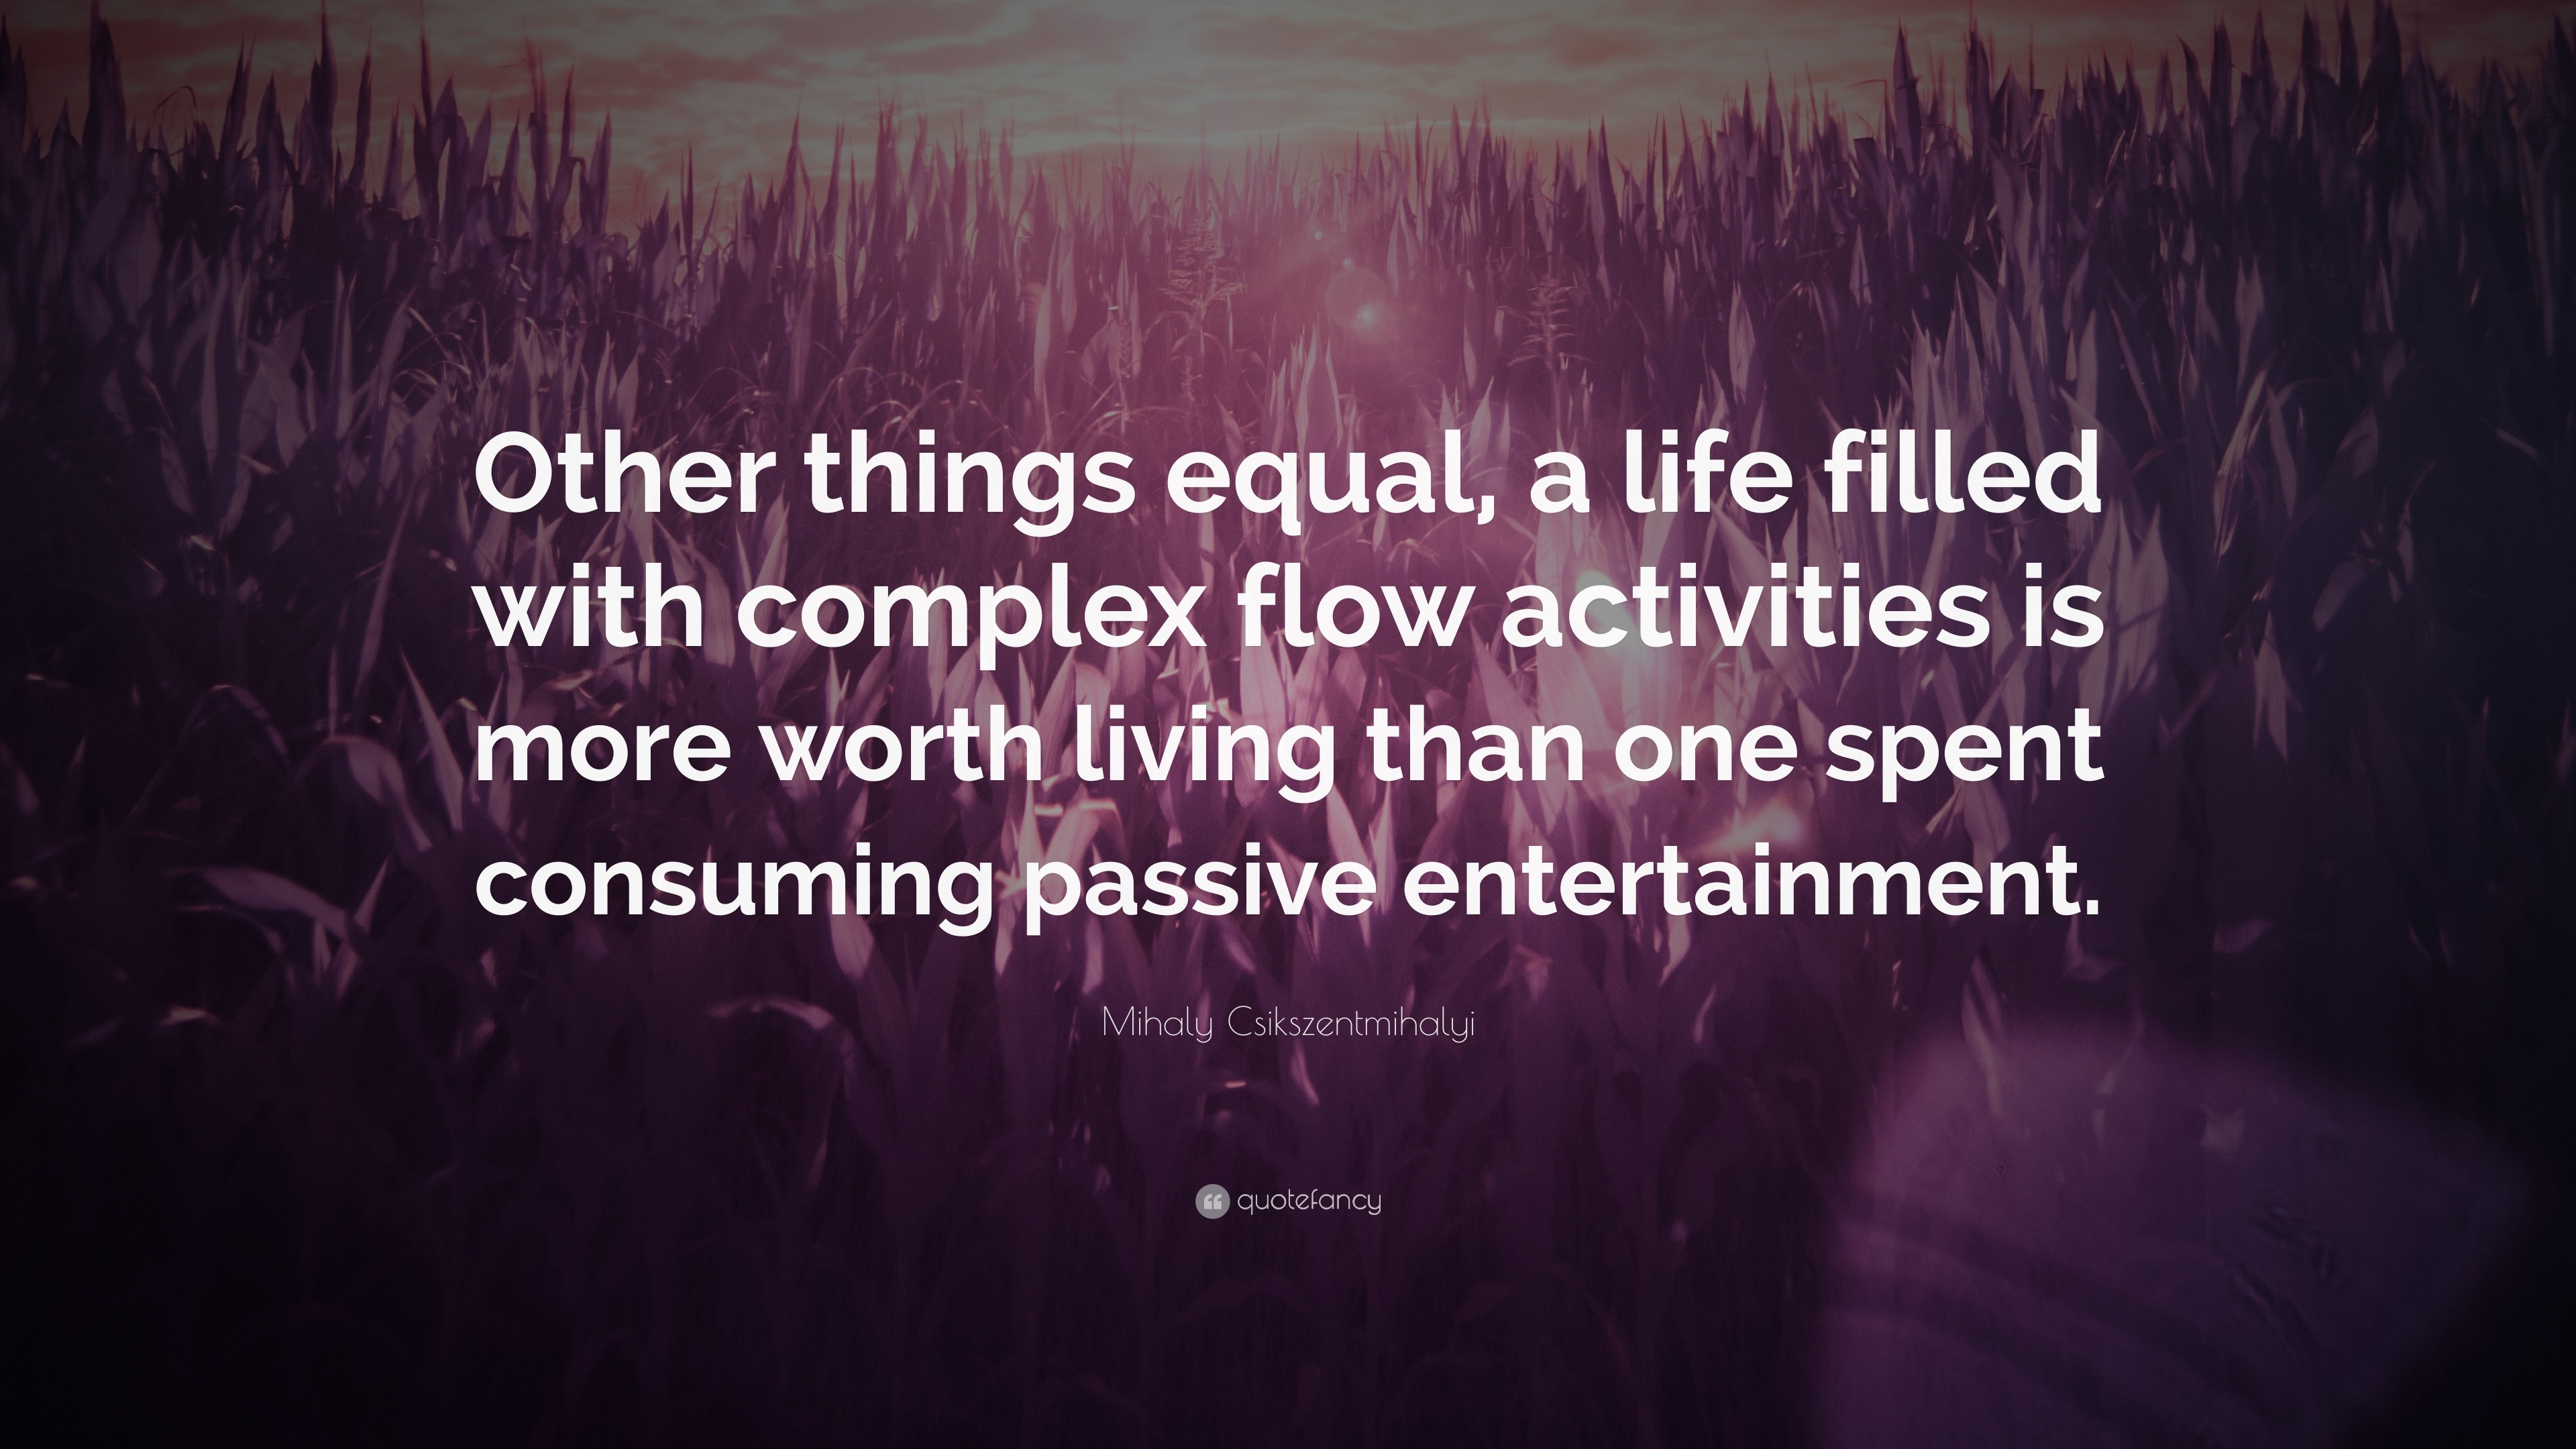 Mihaly Csikszentmihalyi Quote “Other things equal a life filled with plex flow activities